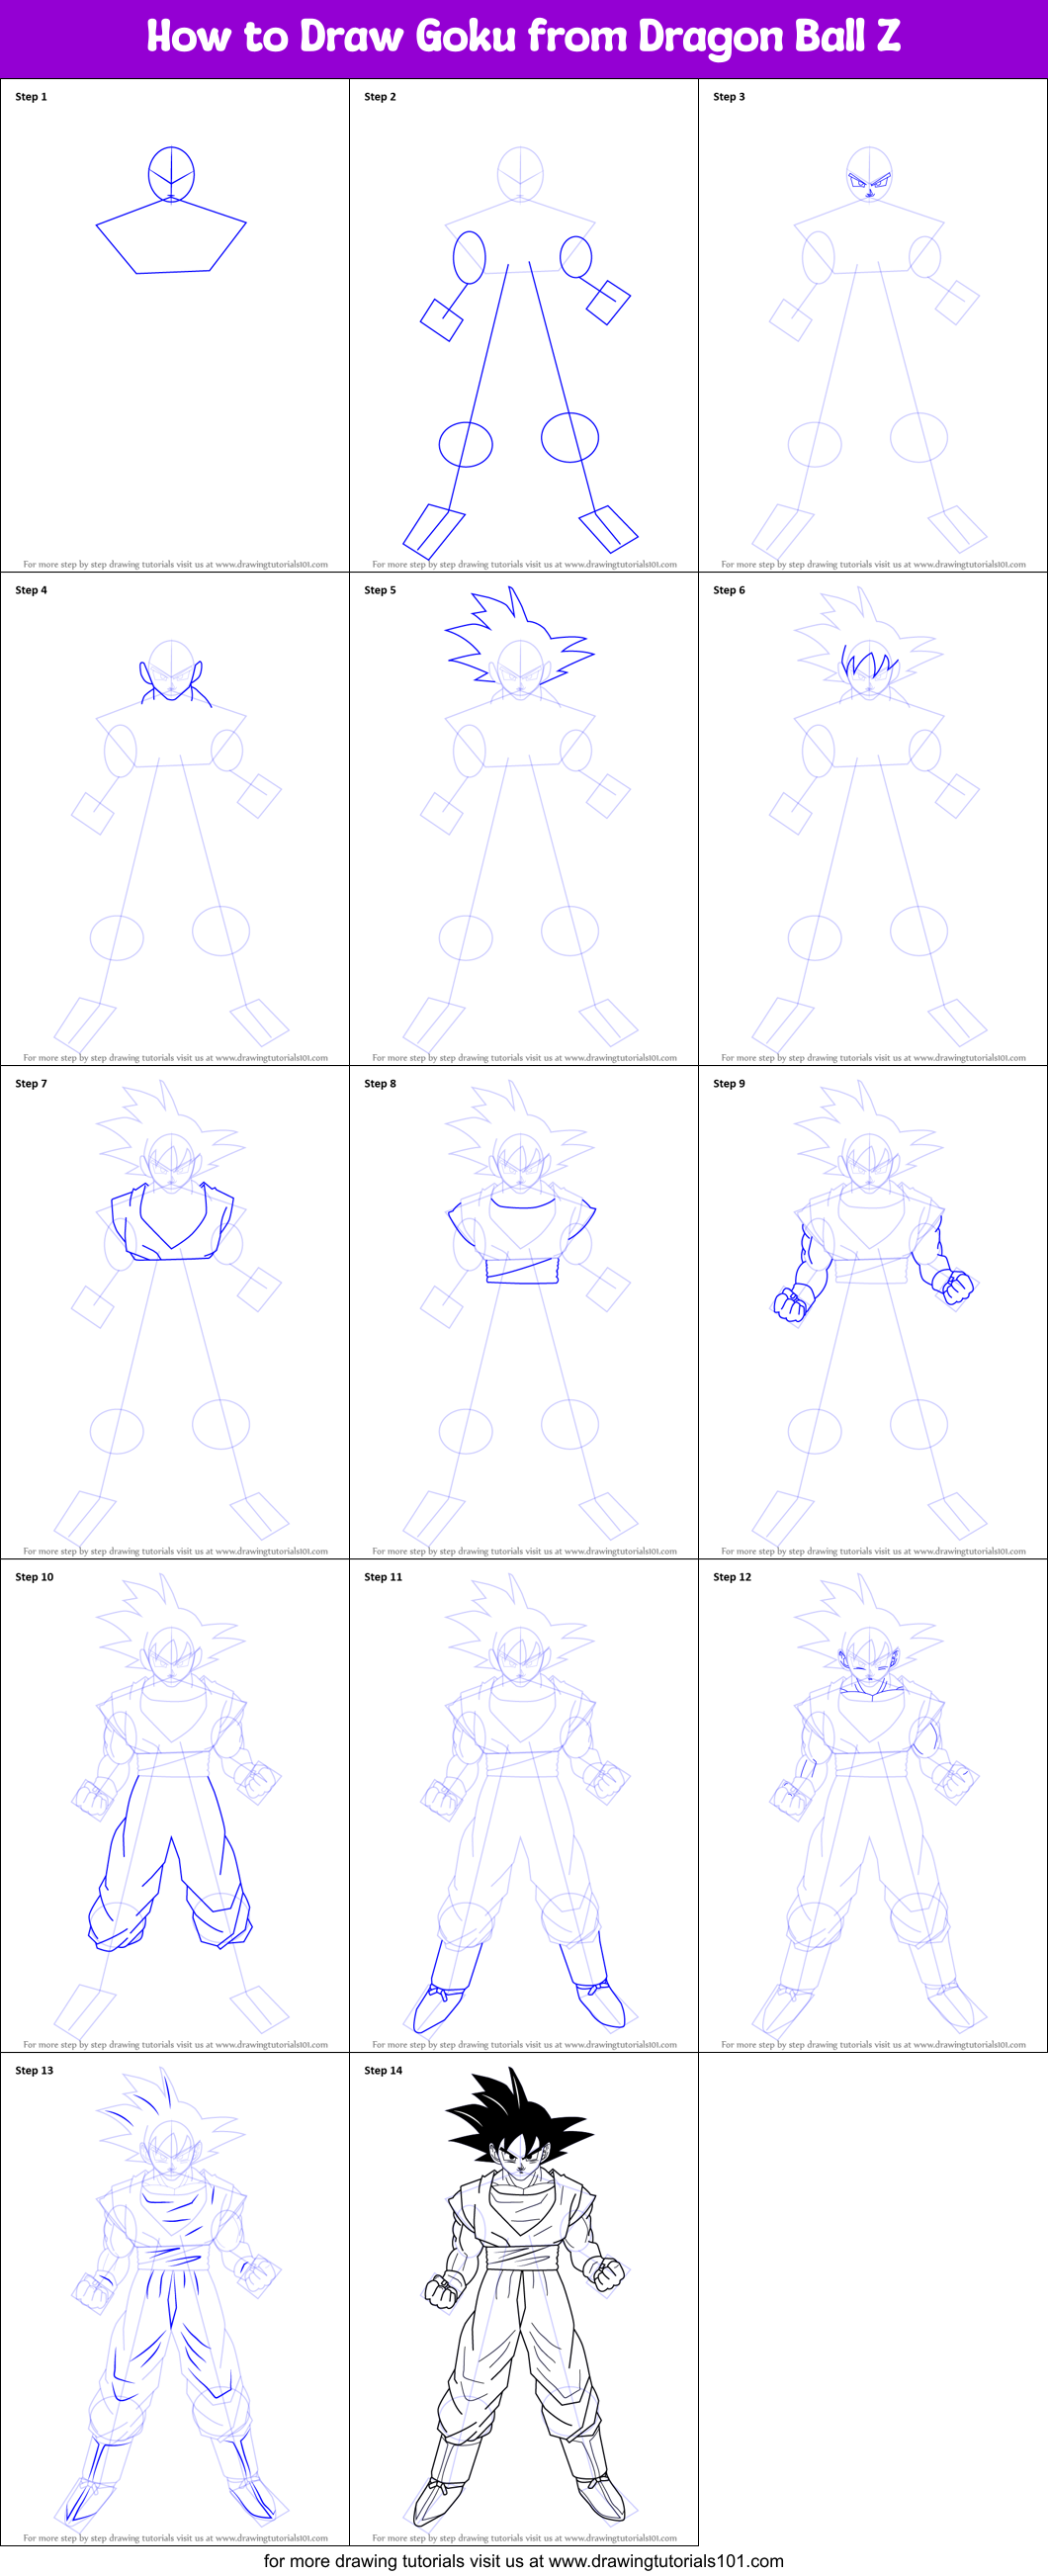 How to Draw Goku from Dragon Ball Z printable step by step drawing